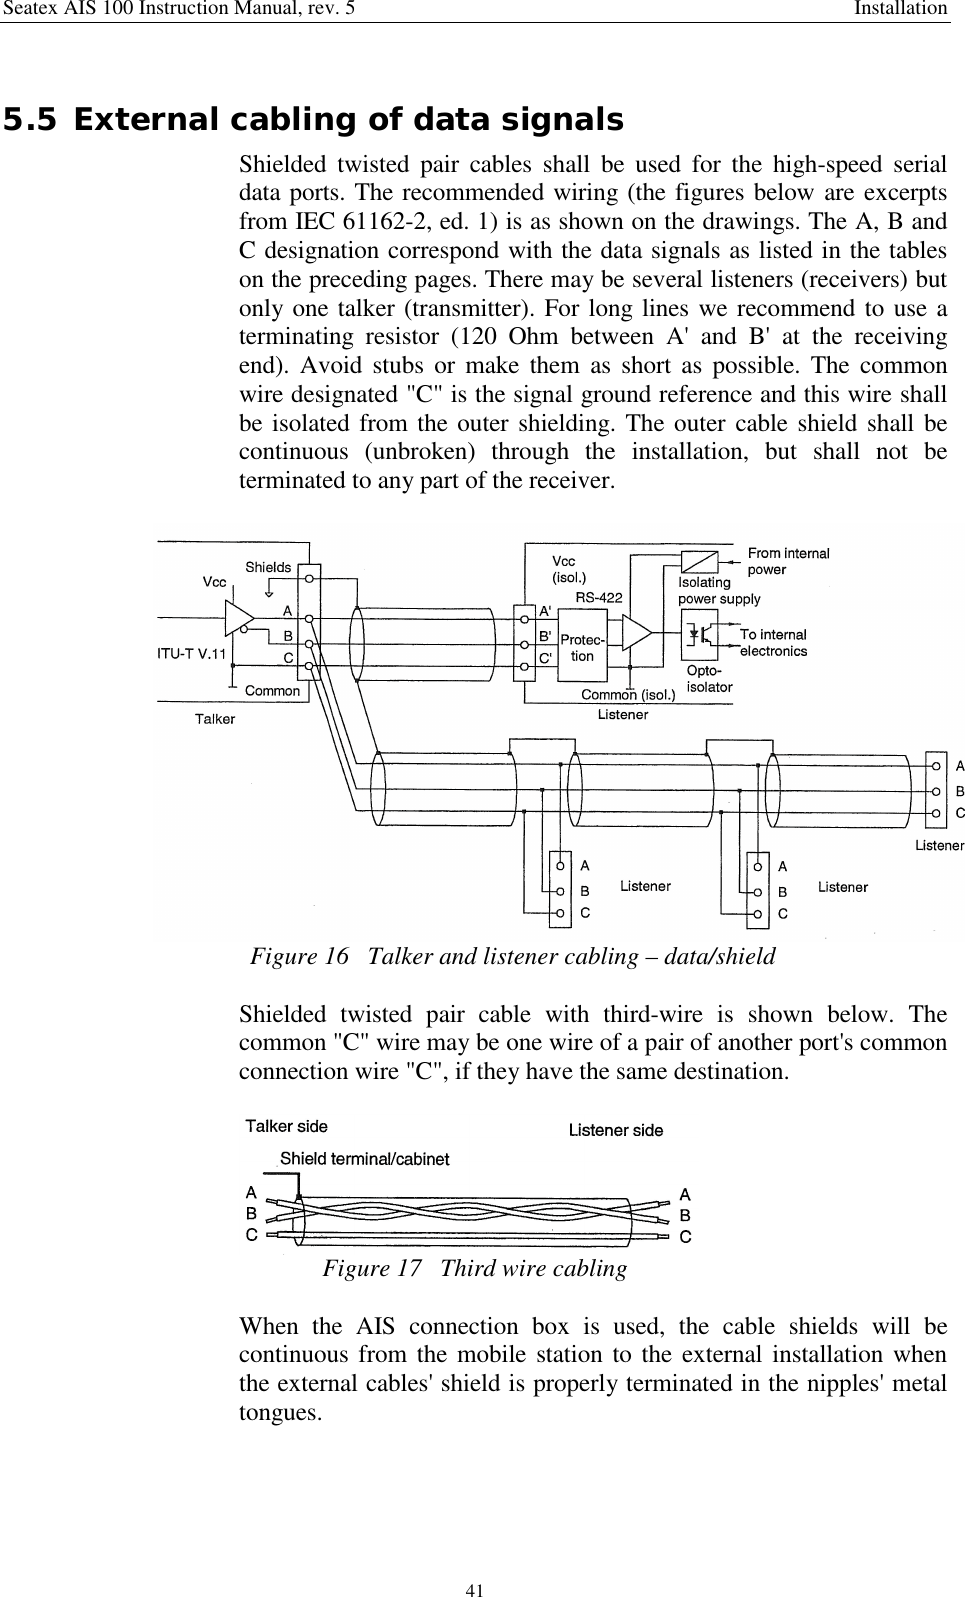 Seatex AIS 100 Instruction Manual, rev. 5 Installation415.5 External cabling of data signalsShielded twisted pair cables shall be used for the high-speed serialdata ports. The recommended wiring (the figures below are excerptsfrom IEC 61162-2, ed. 1) is as shown on the drawings. The A, B andC designation correspond with the data signals as listed in the tableson the preceding pages. There may be several listeners (receivers) butonly one talker (transmitter). For long lines we recommend to use aterminating resistor (120 Ohm between A&apos; and B&apos; at the receivingend). Avoid stubs or make them as short as possible. The commonwire designated &quot;C&quot; is the signal ground reference and this wire shallbe isolated from the outer shielding. The outer cable shield shall becontinuous (unbroken) through the installation, but shall not beterminated to any part of the receiver.Figure 16   Talker and listener cabling – data/shieldShielded twisted pair cable with third-wire is shown below. Thecommon &quot;C&quot; wire may be one wire of a pair of another port&apos;s commonconnection wire &quot;C&quot;, if they have the same destination.Figure 17   Third wire cablingWhen the AIS connection box is used, the cable shields will becontinuous from the mobile station to the external installation whenthe external cables&apos; shield is properly terminated in the nipples&apos; metaltongues.